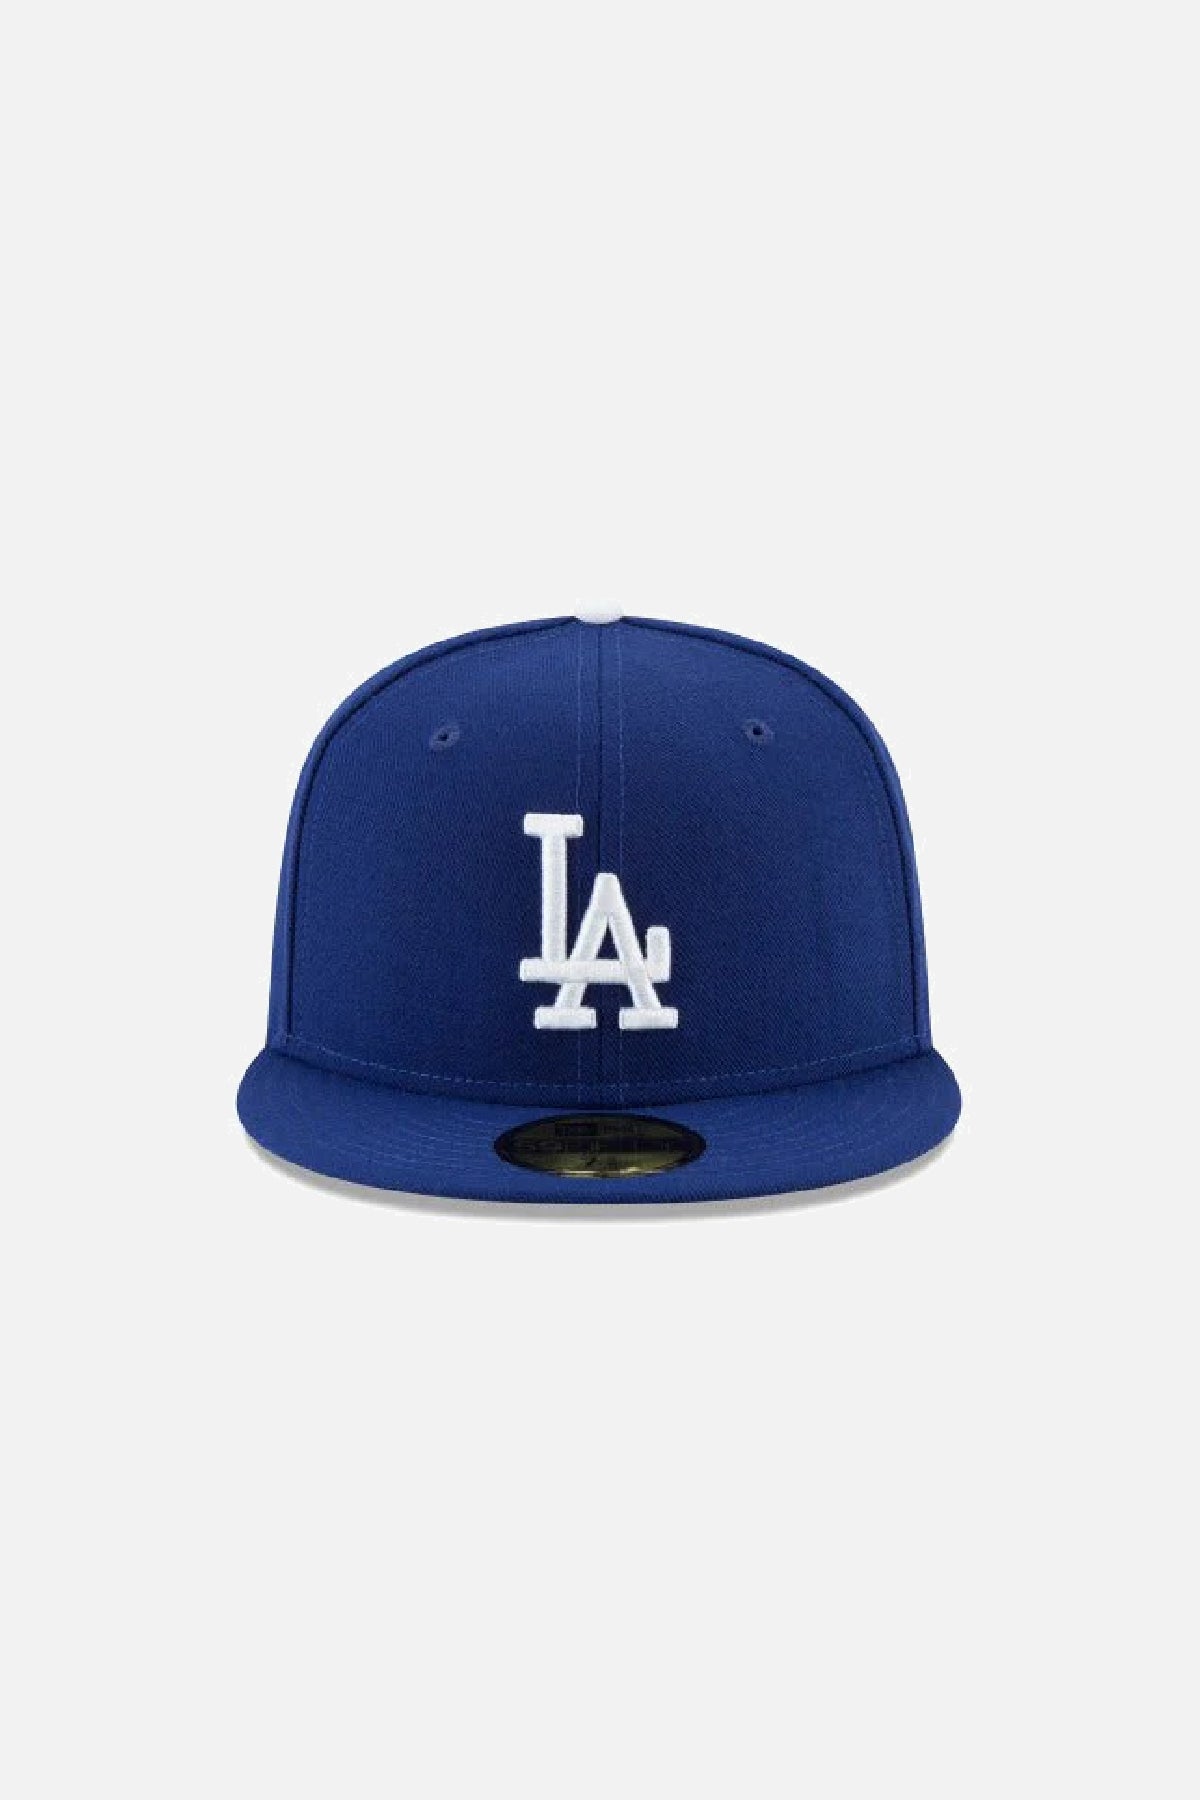 New Era LA Dodgers Authentic Game 59/50 Fitted